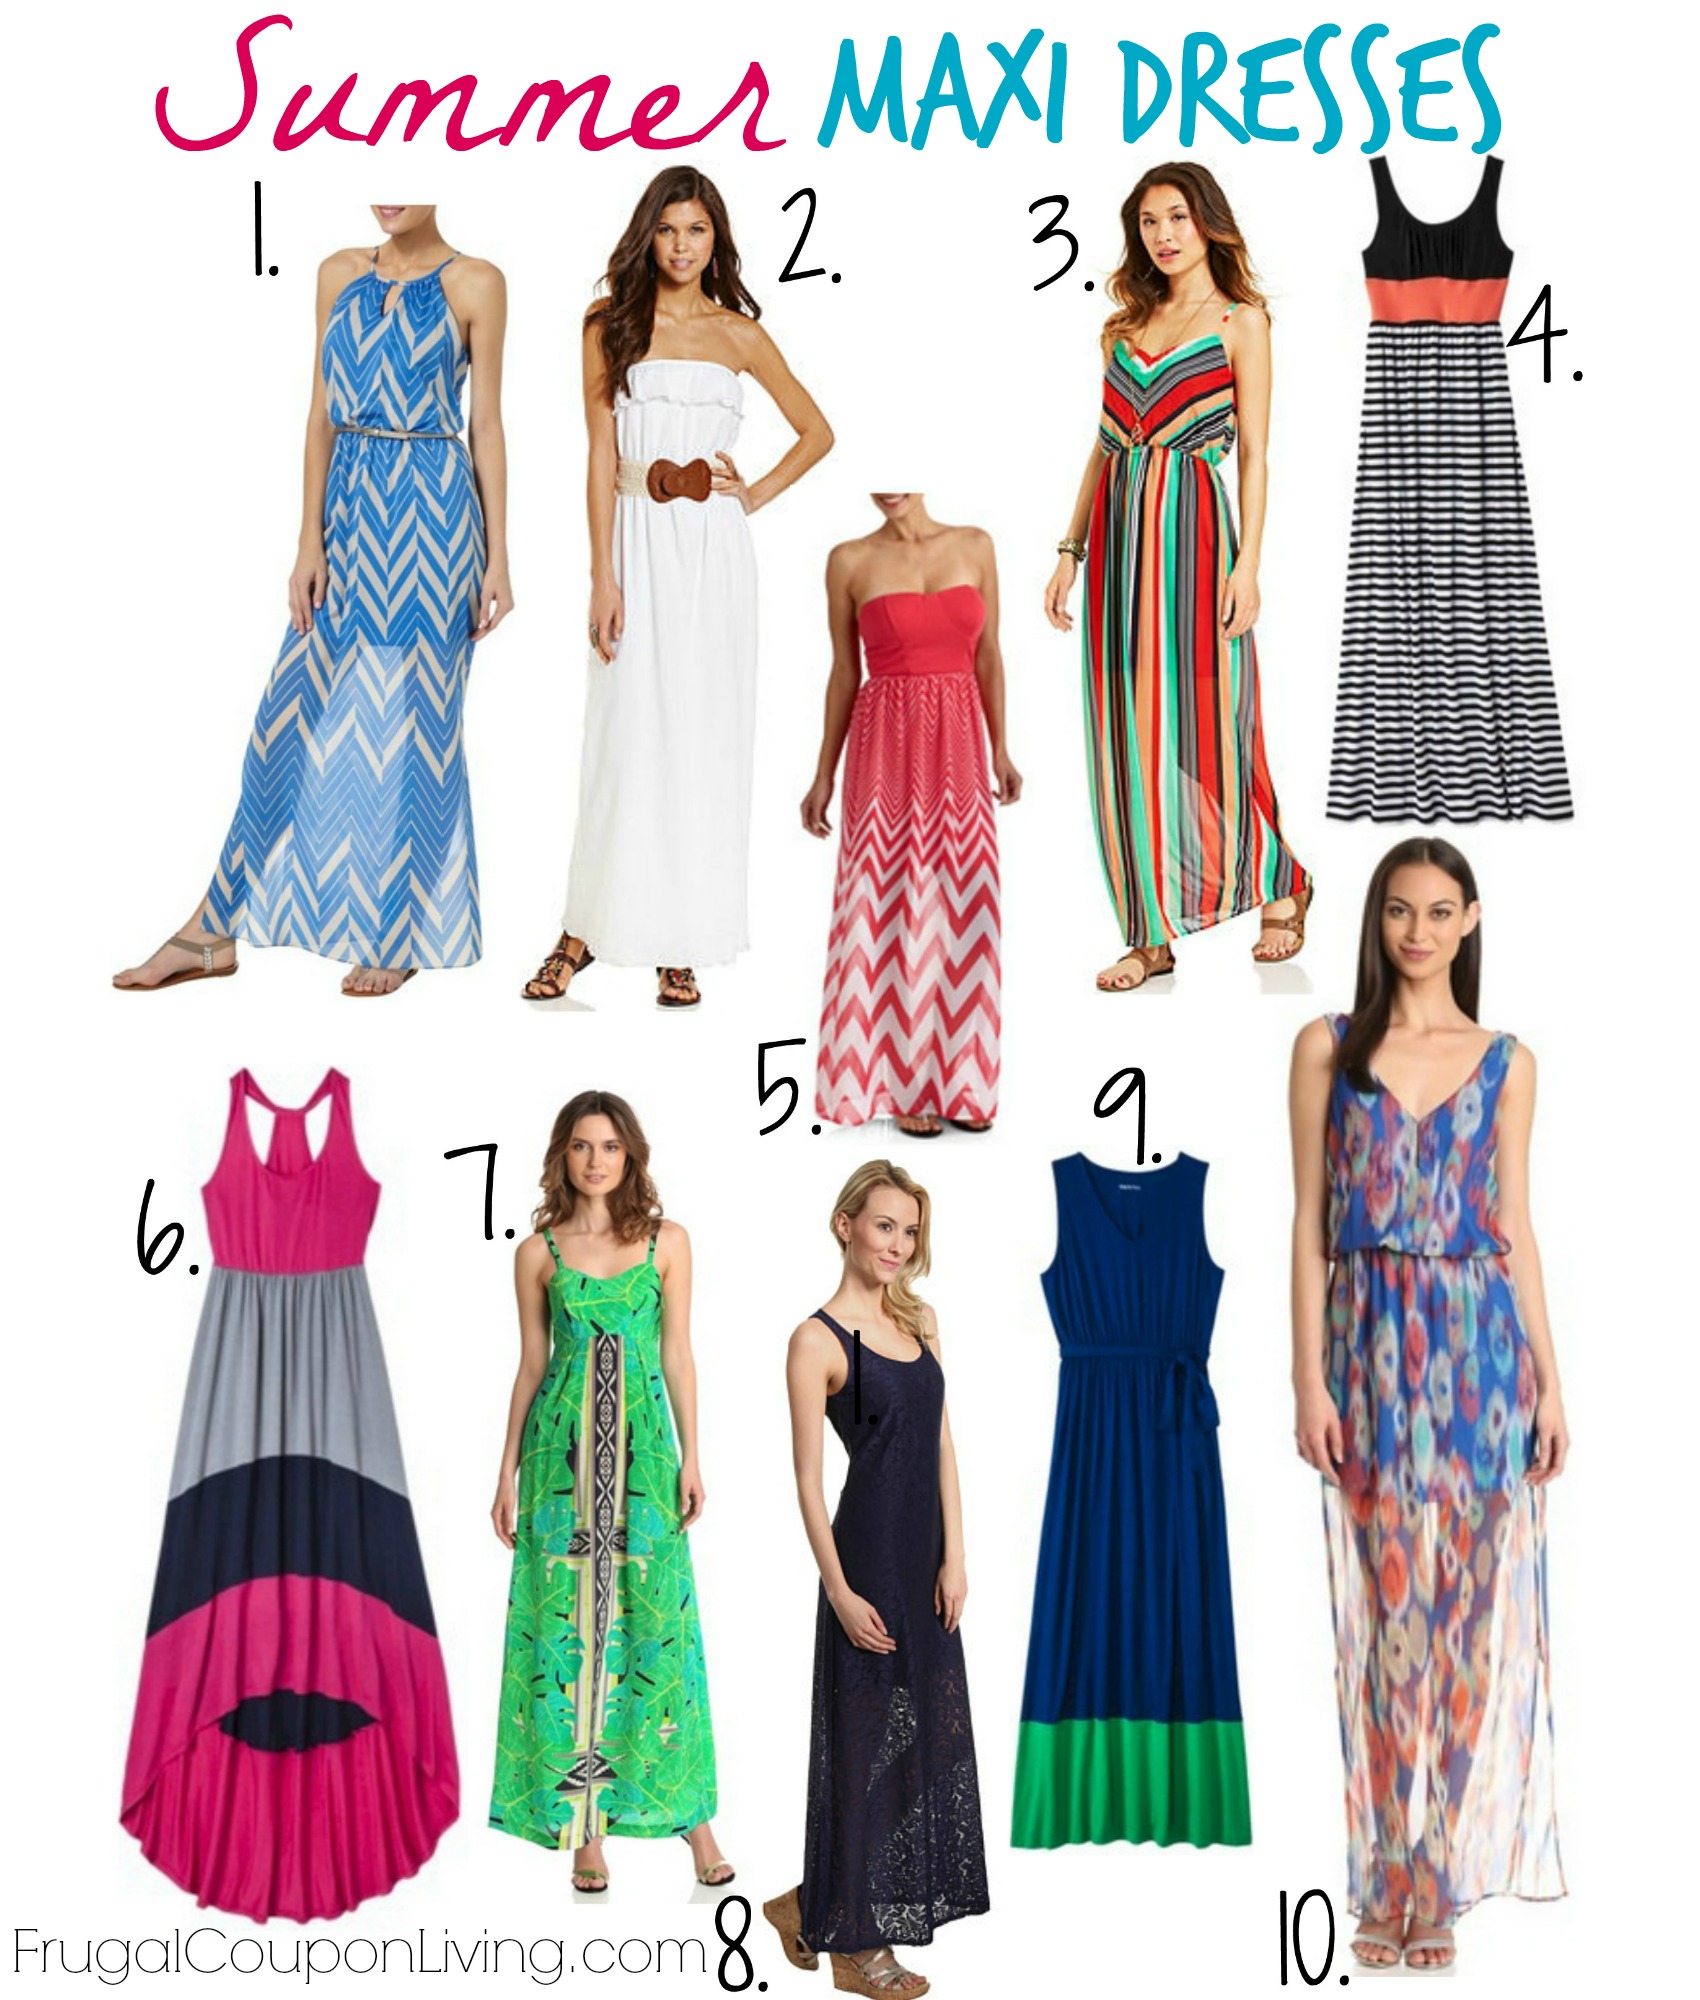 Where can you find Frugal Fannie's dresses?